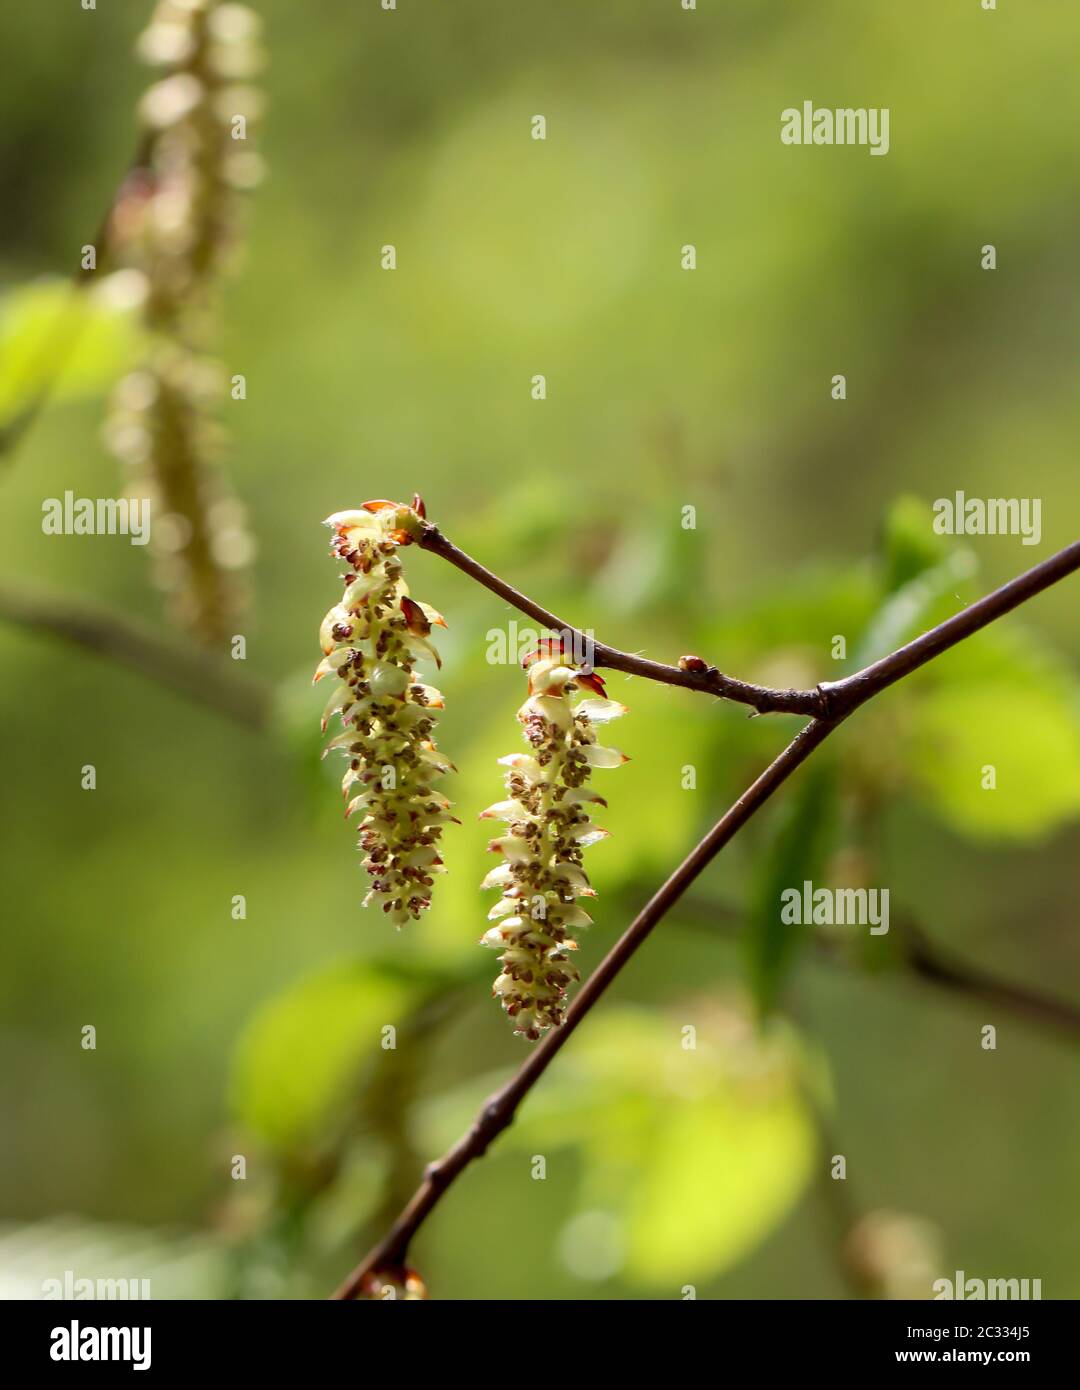 Flowers and pollen, leaves of the alder, provide in the spring for hay fever in alergic people Stock Photo